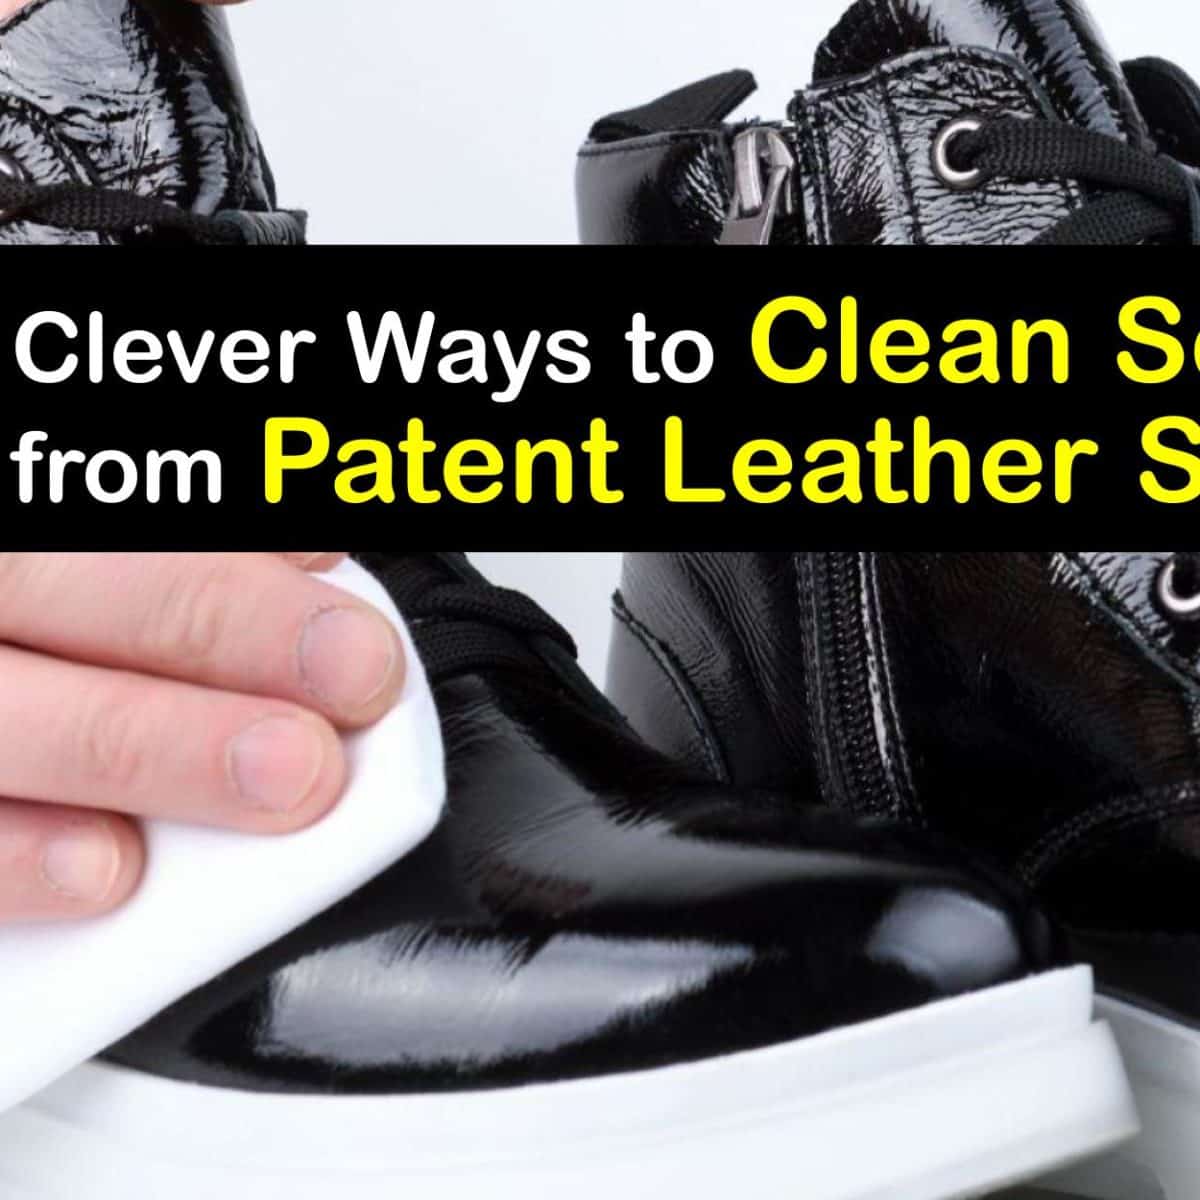 on Patent Leather - Get Rid Scuff Marks on Shoes